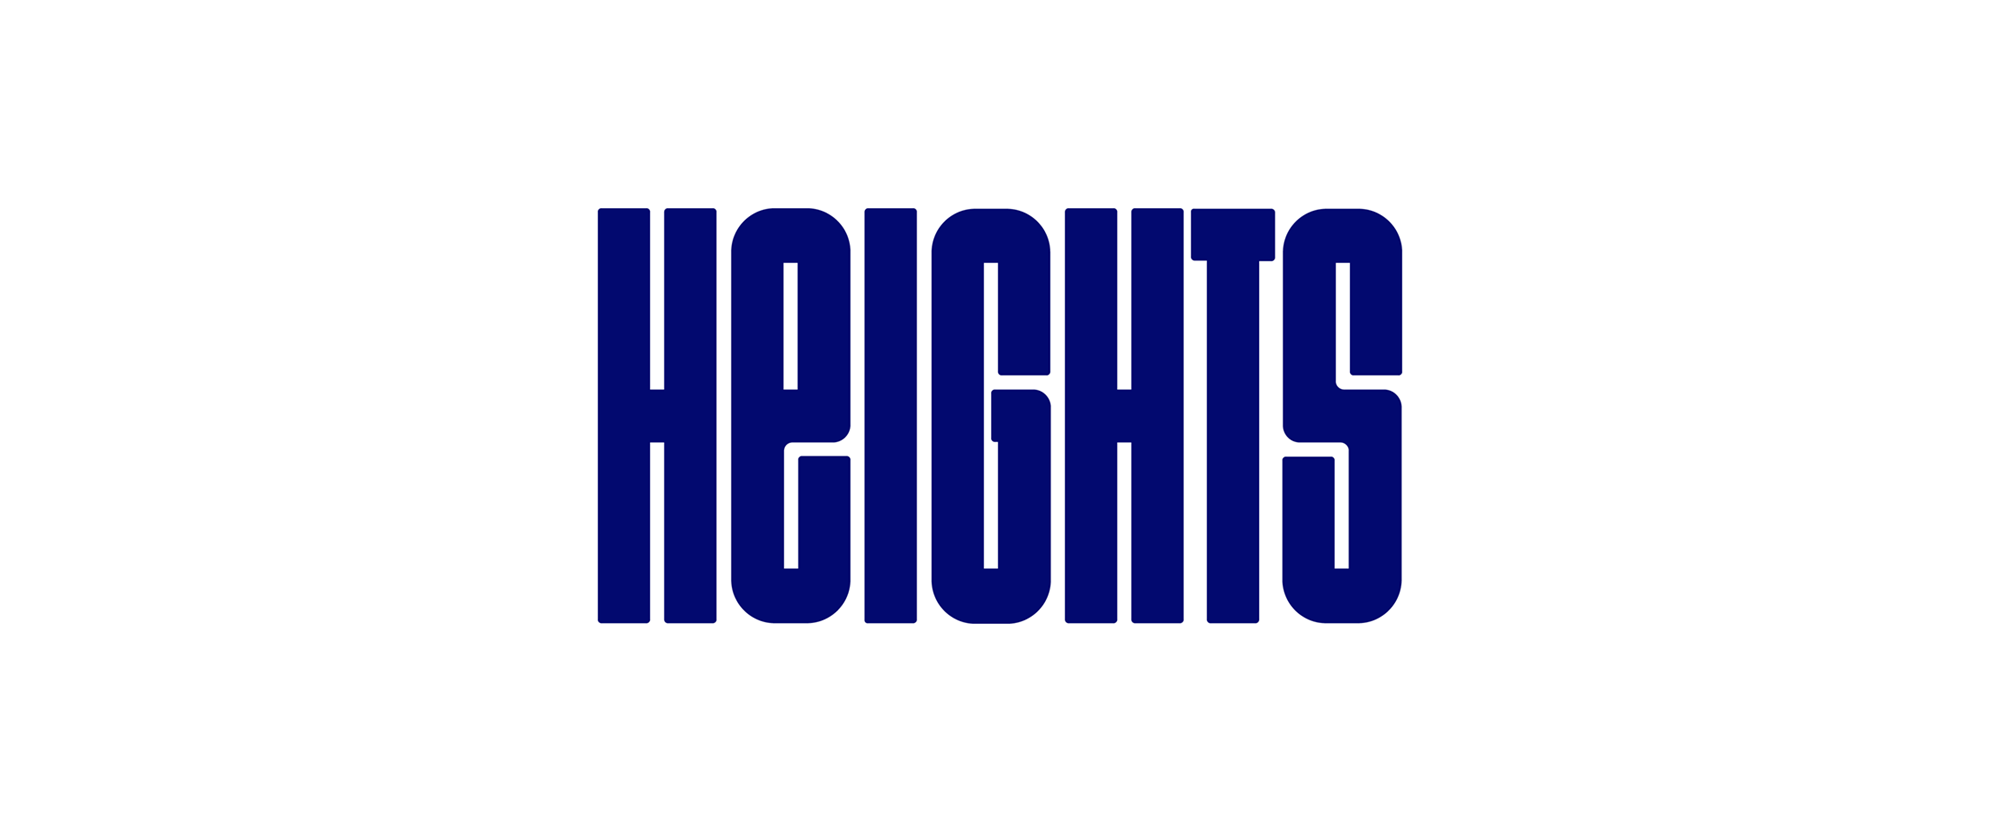 New Logo and Identity for Heights by Ragged Edge